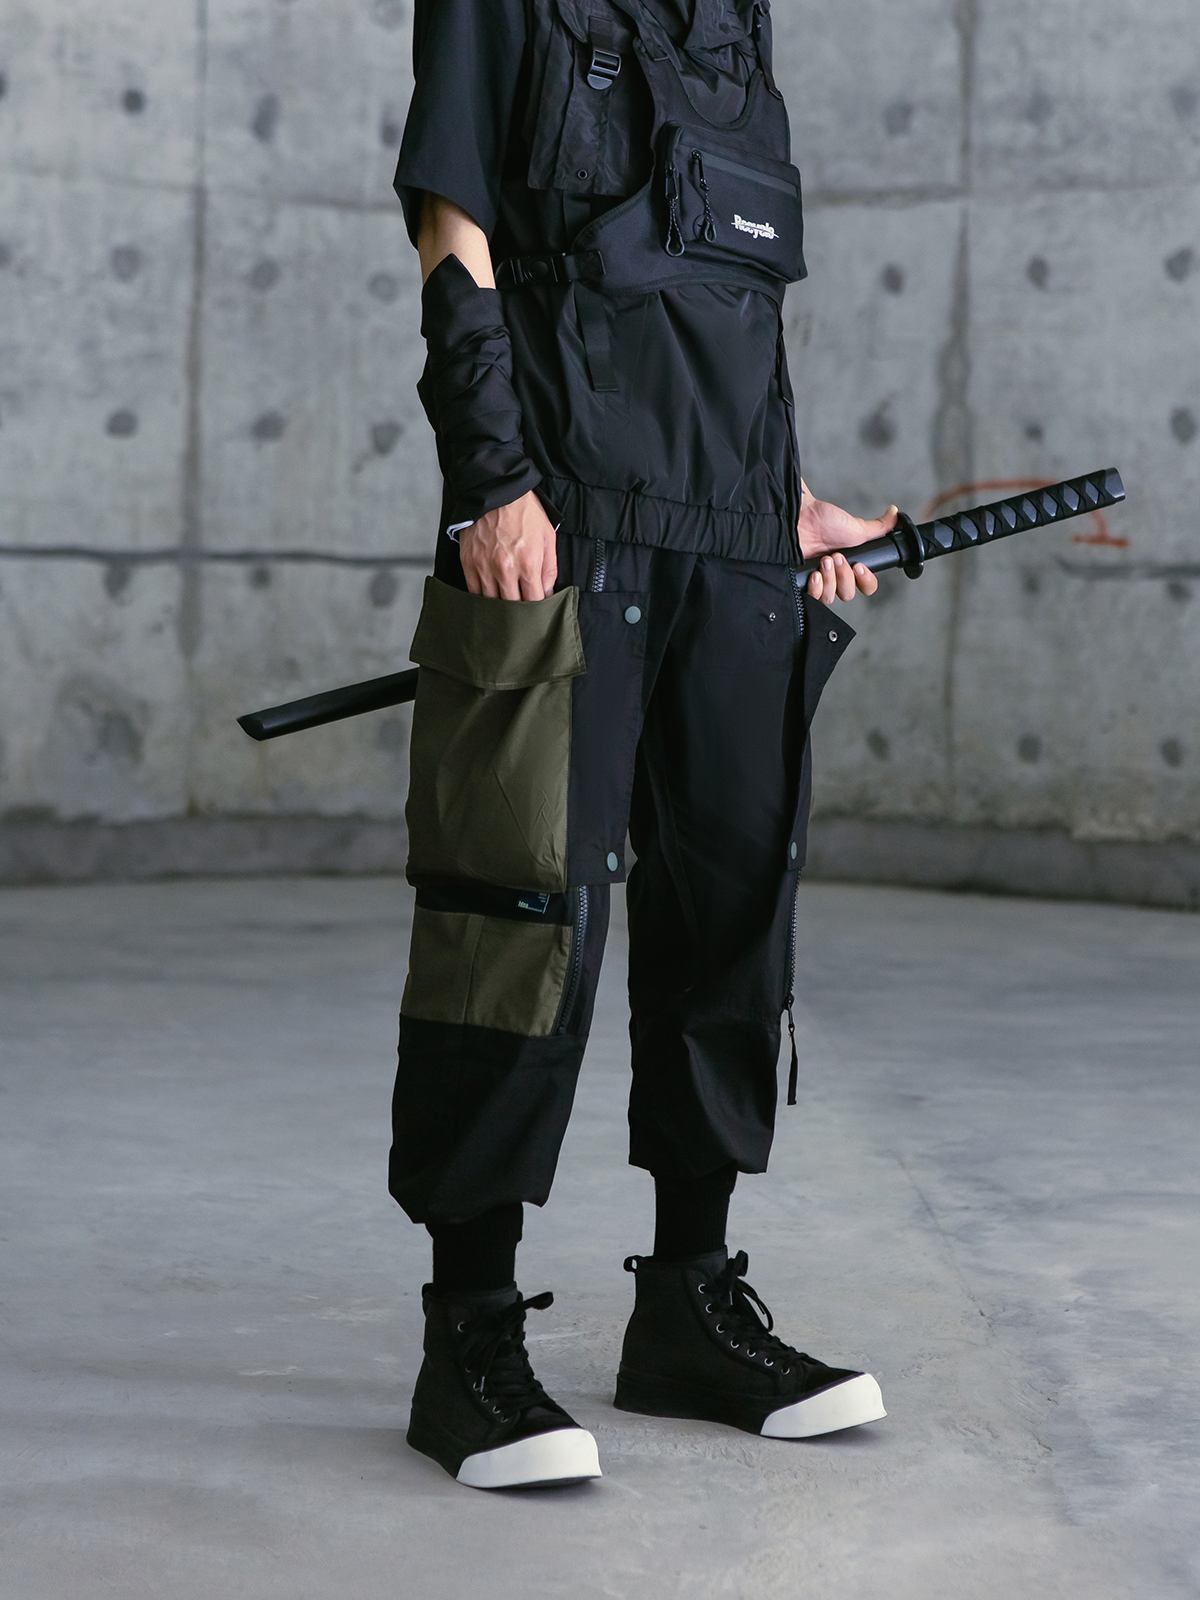 https://cgiclothing.co.uk/images/trousers-joggers/sacrament-multi-pocket-patchwork-cuffed-techwear-joggers-black.jpg